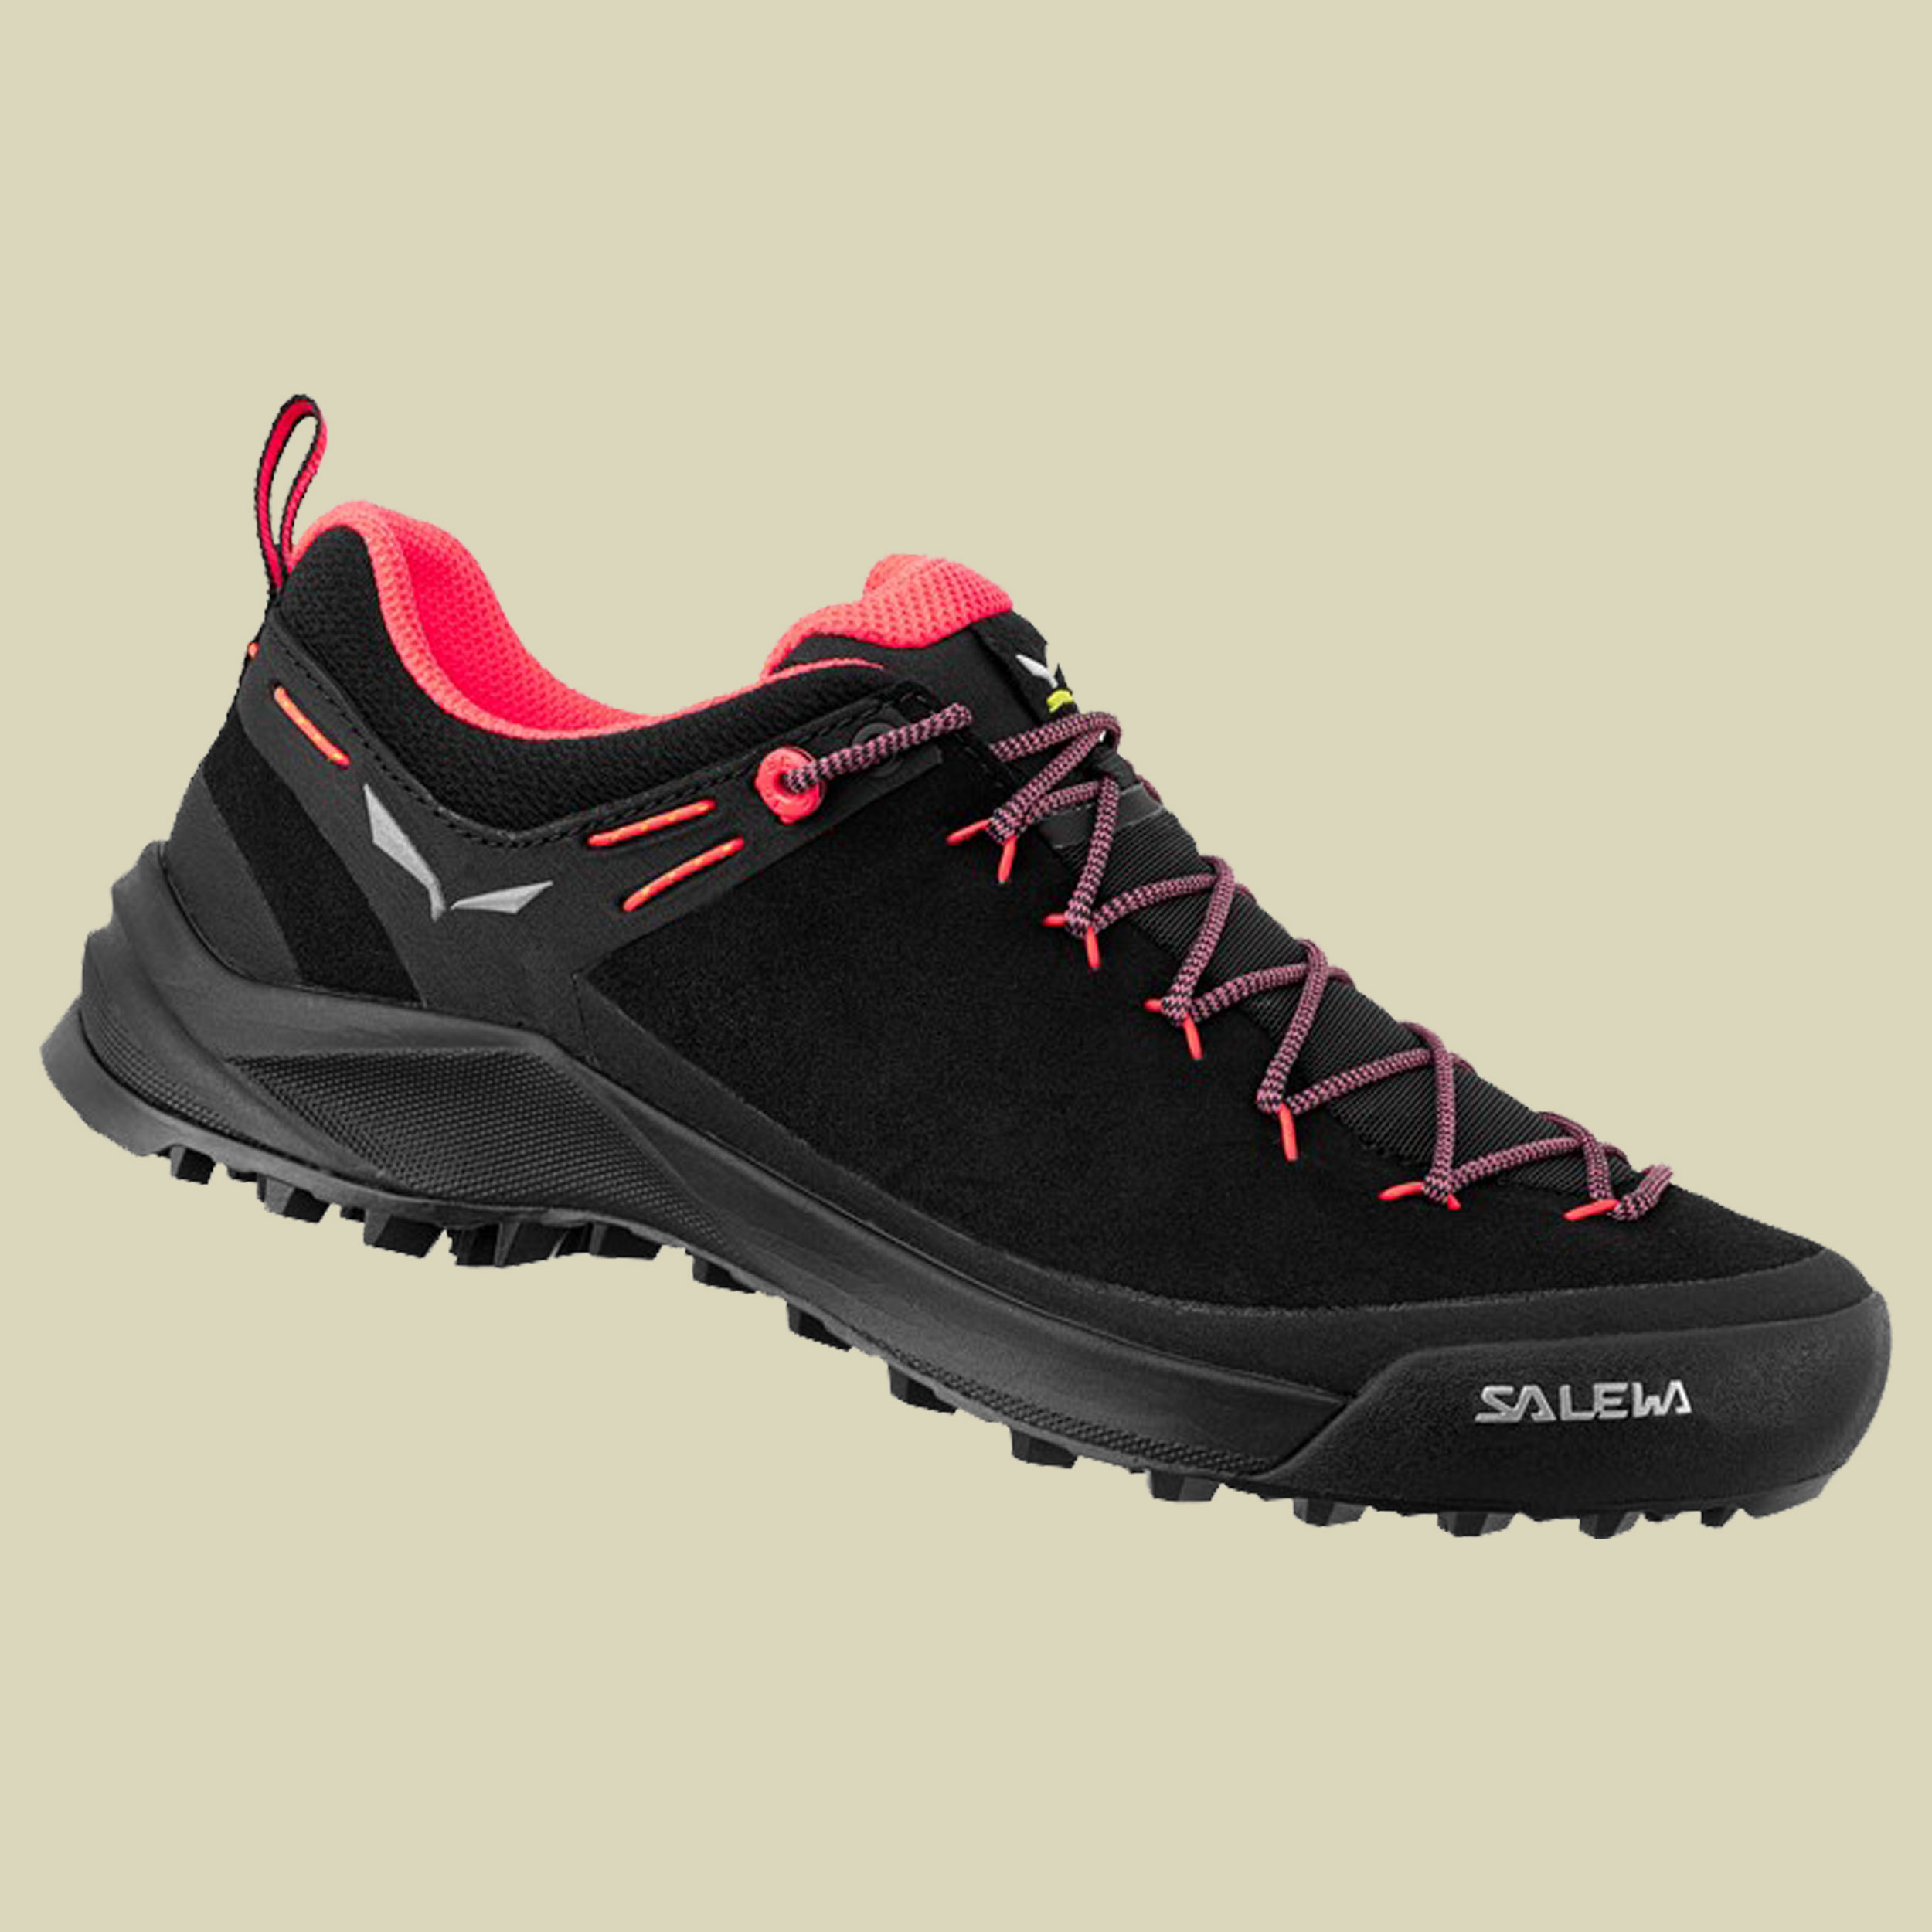 WS Wildfire Leather Größe UK 5,5 Farbe black/fluo coral